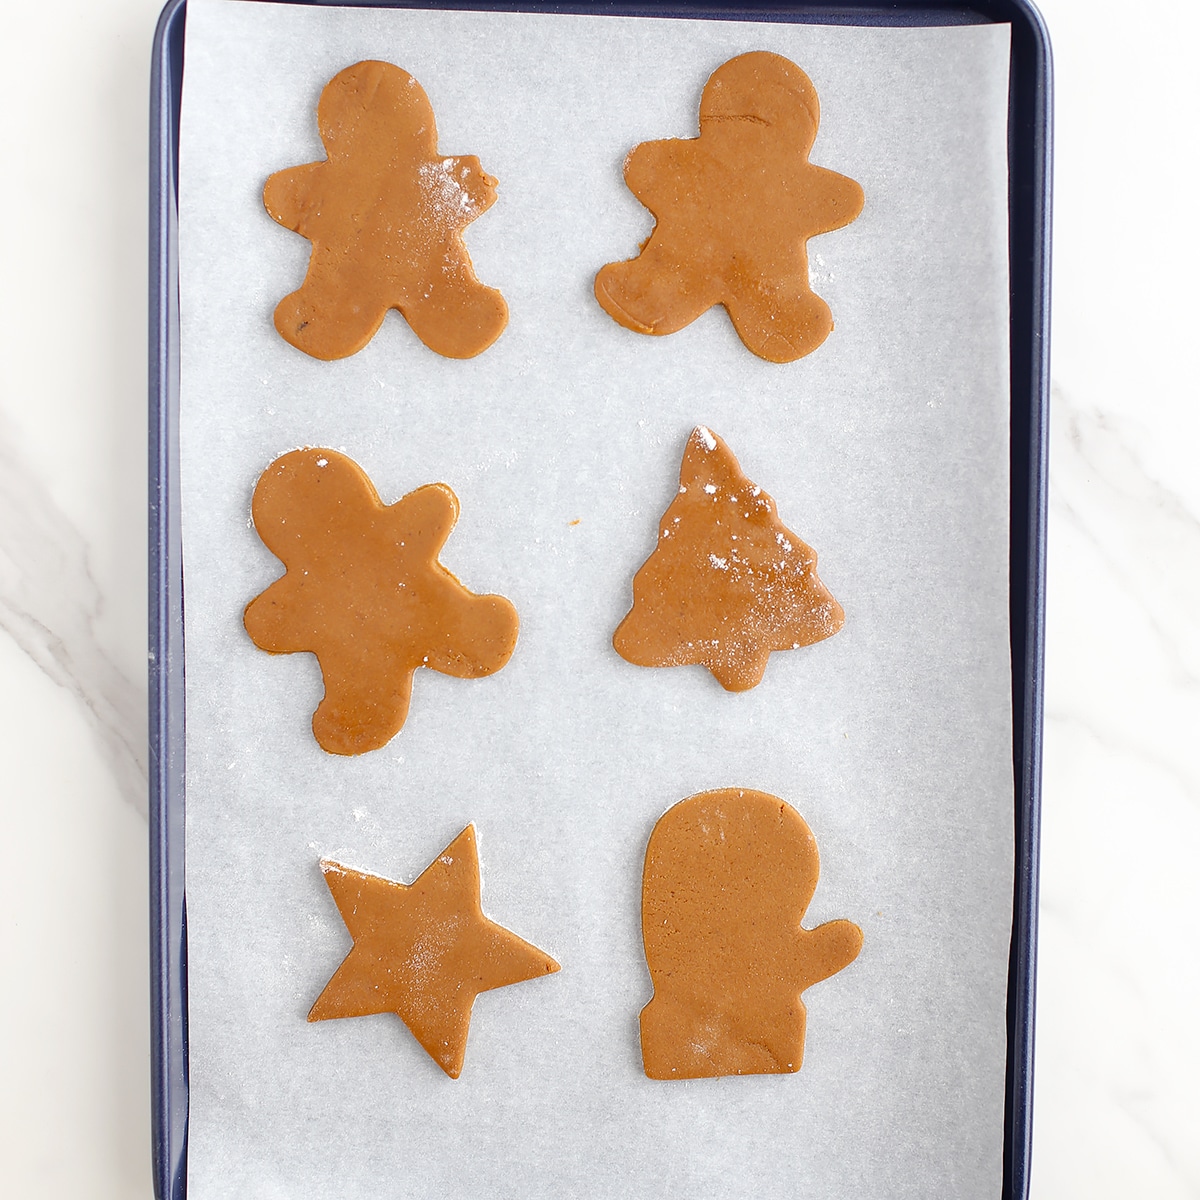 Gingerbread cookie dough on a parchment lined baking sheet.